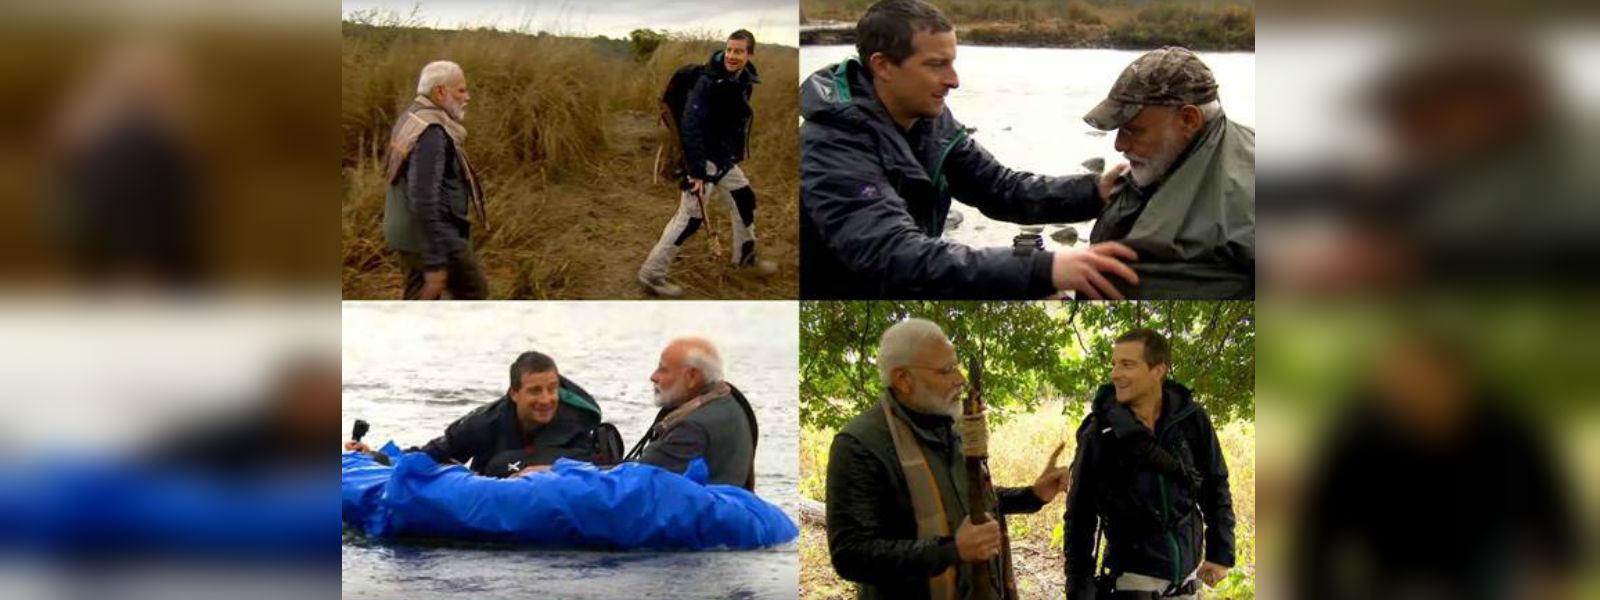 Modi to feature in "Man vs Wild" with Bear Grylls